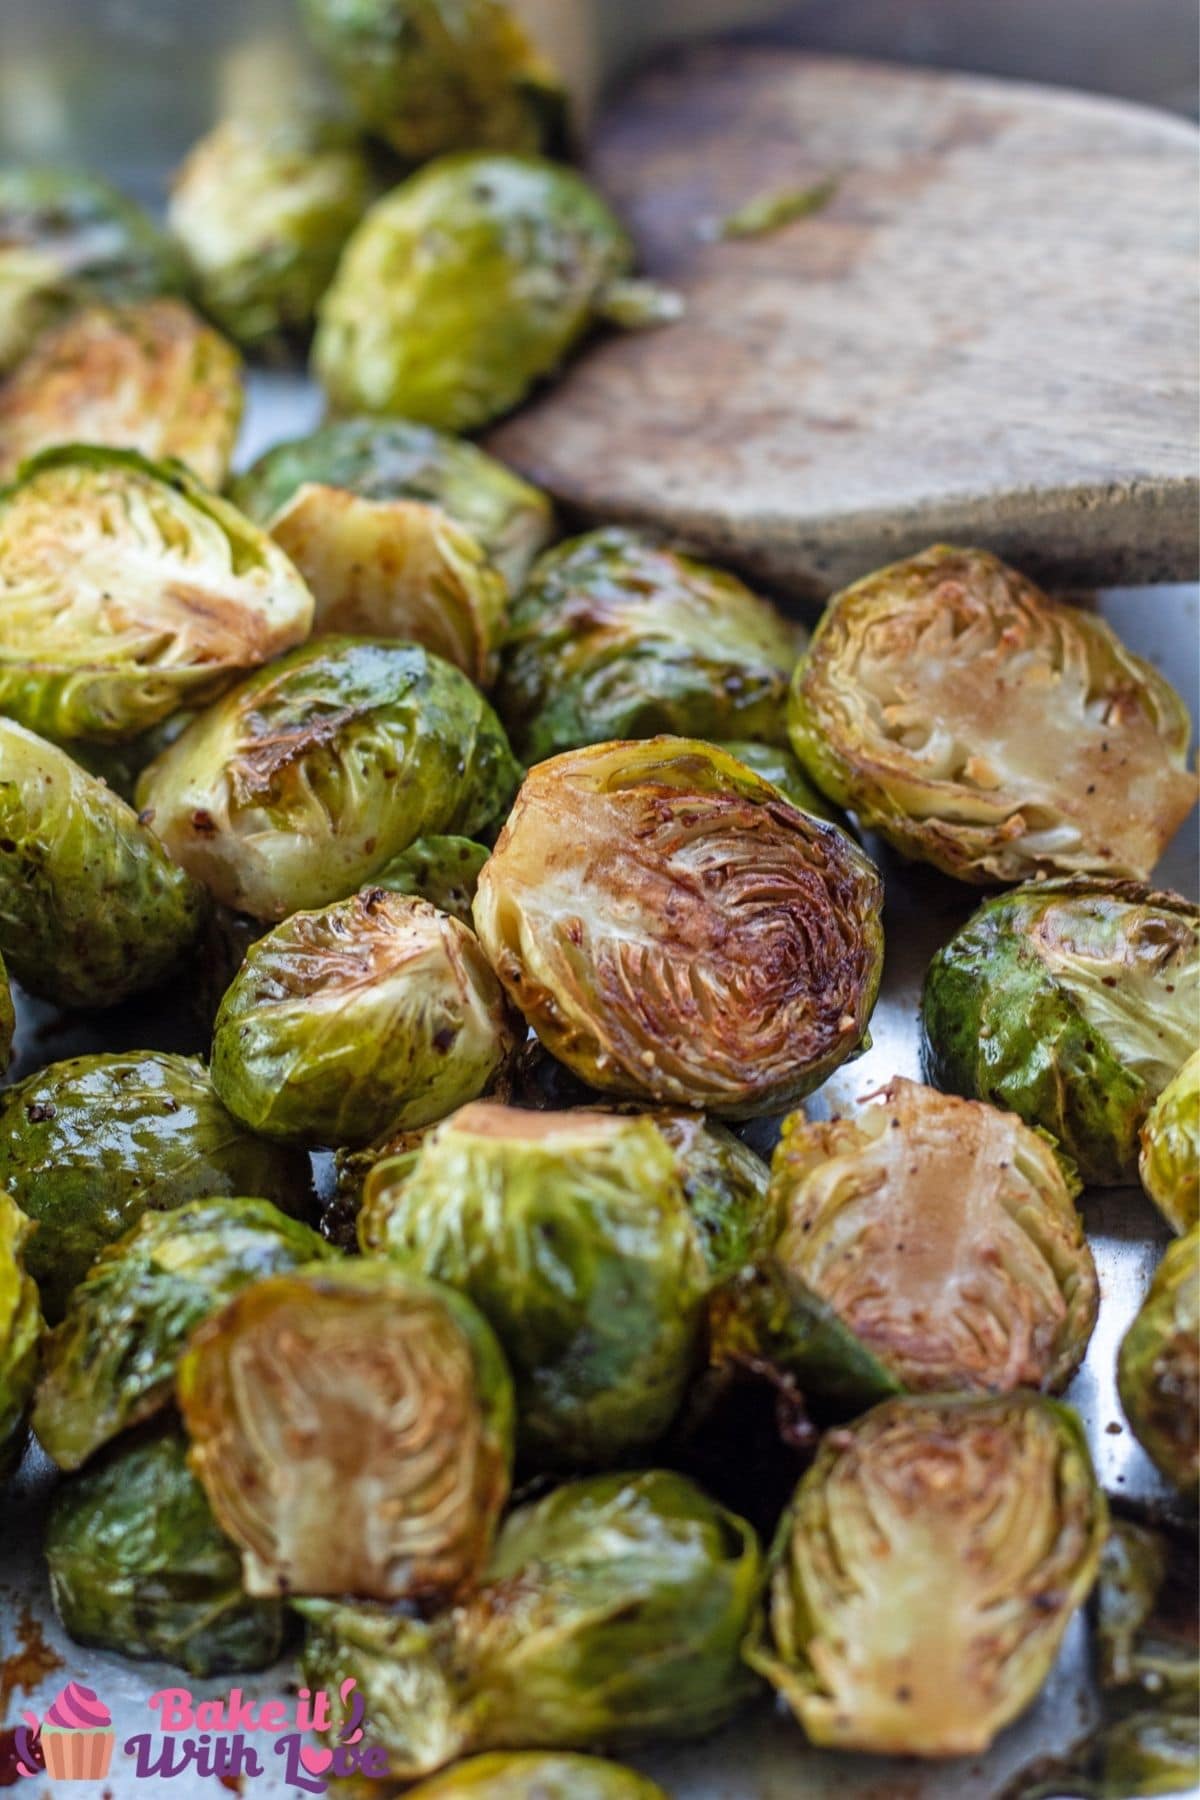 Tall closeup on the balsamic roasted brussel sprouts.